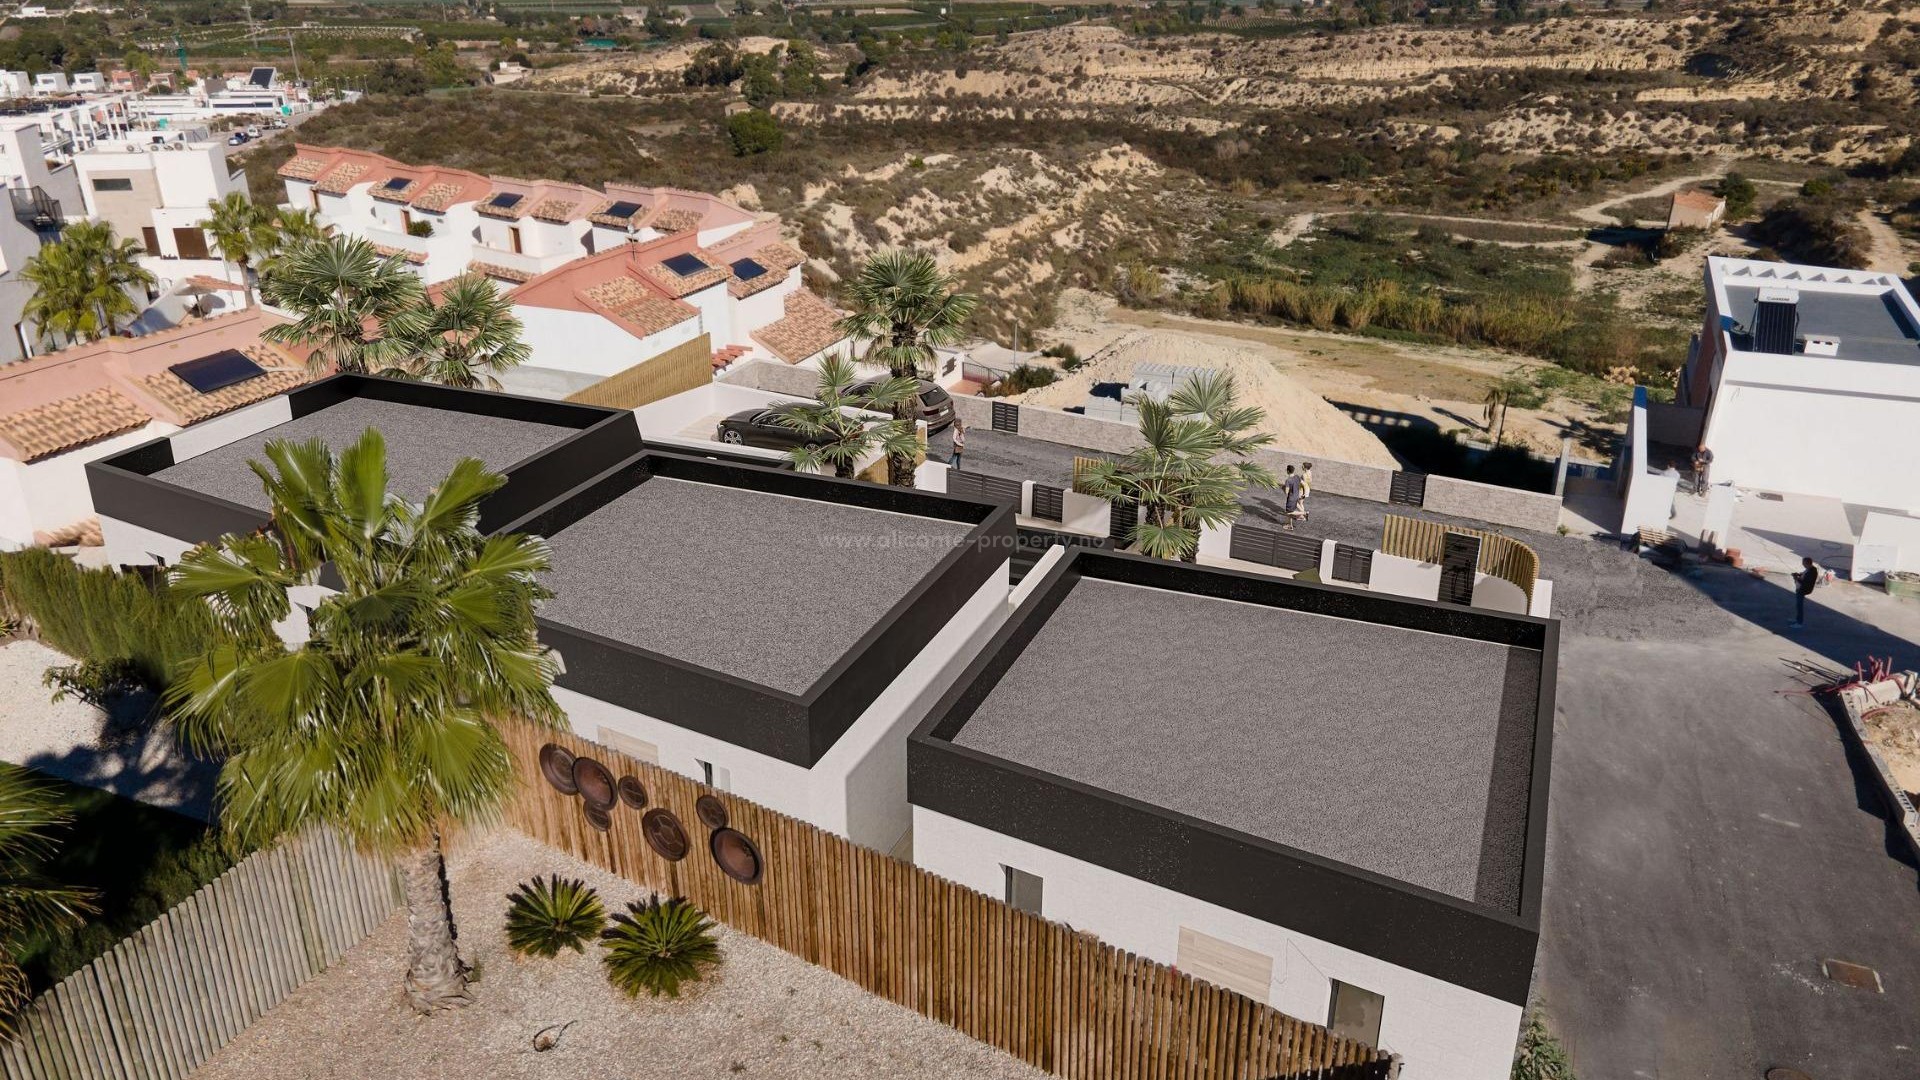 Large townhouse/house in Rojales with panoramic views and incredible views of the Costa Blanca, 3 bedrooms, 3 bathrooms, terrace with private pool